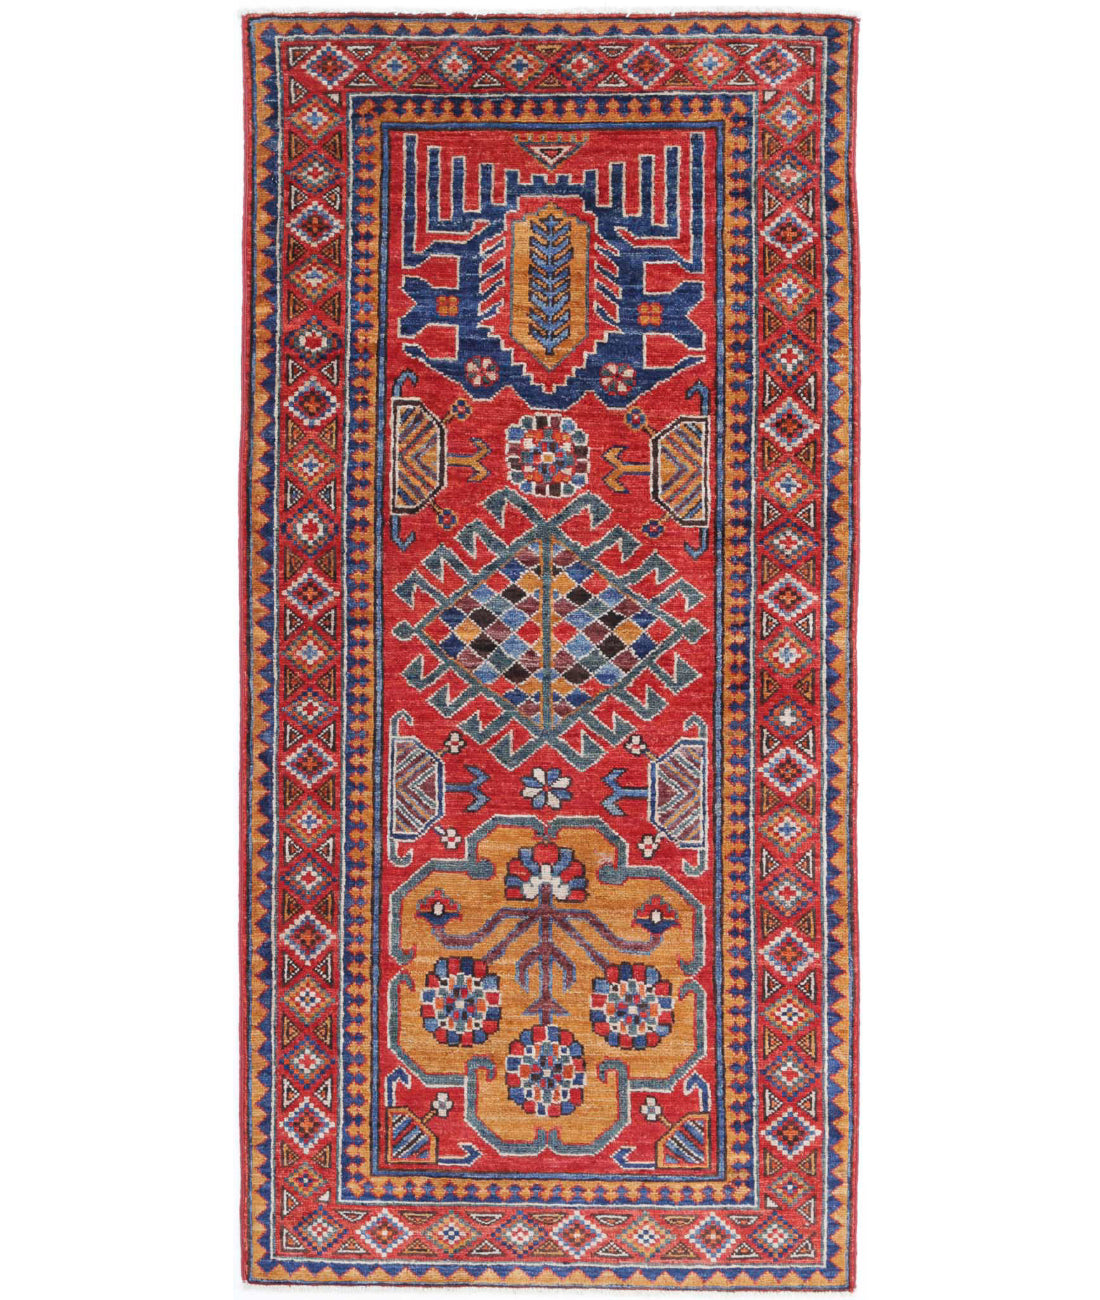 Hand Knotted Nomadic Caucasian Humna Wool Rug - 2&#39;8&#39;&#39; x 5&#39;10&#39;&#39; 2&#39;8&#39;&#39; x 5&#39;10&#39;&#39; (80 X 175) / Red / Taupe